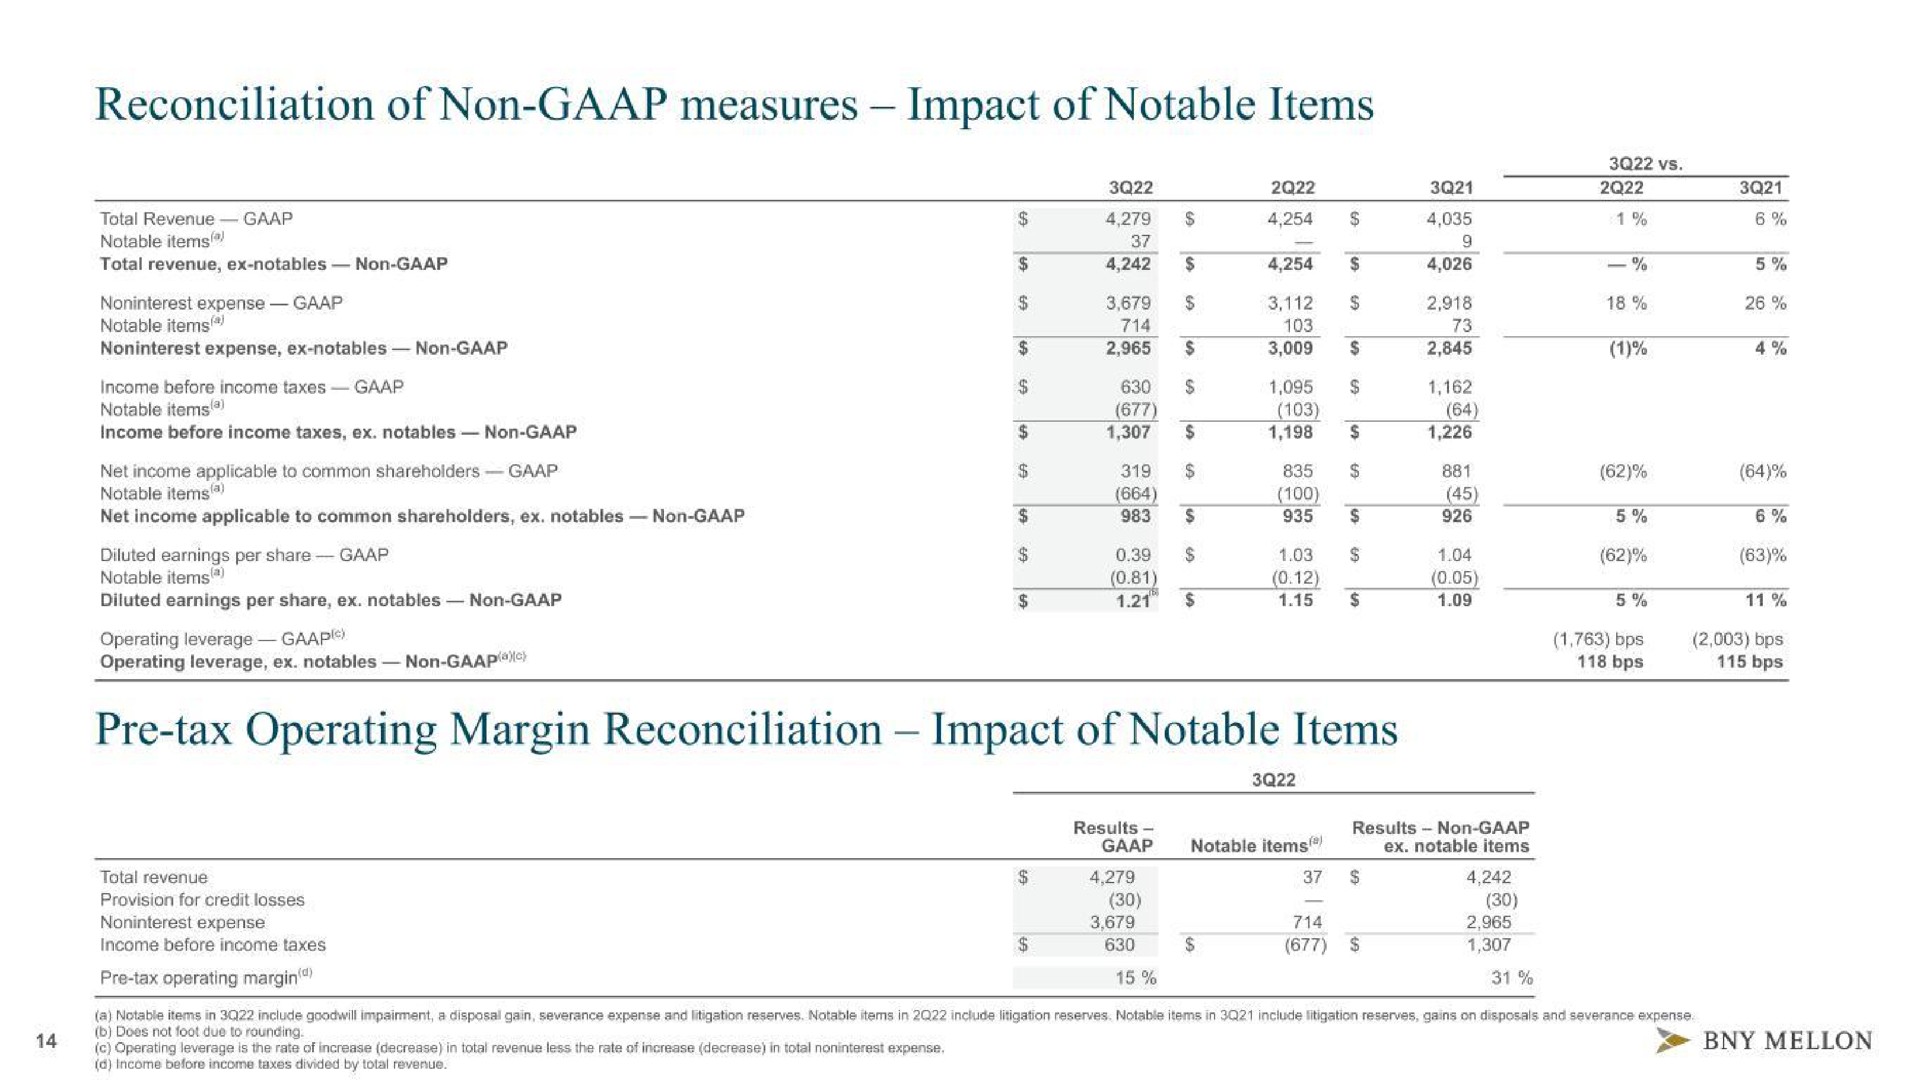 reconciliation of non measures impact of notable items tax operating margin reconciliation impact of notable items | BNY Mellon